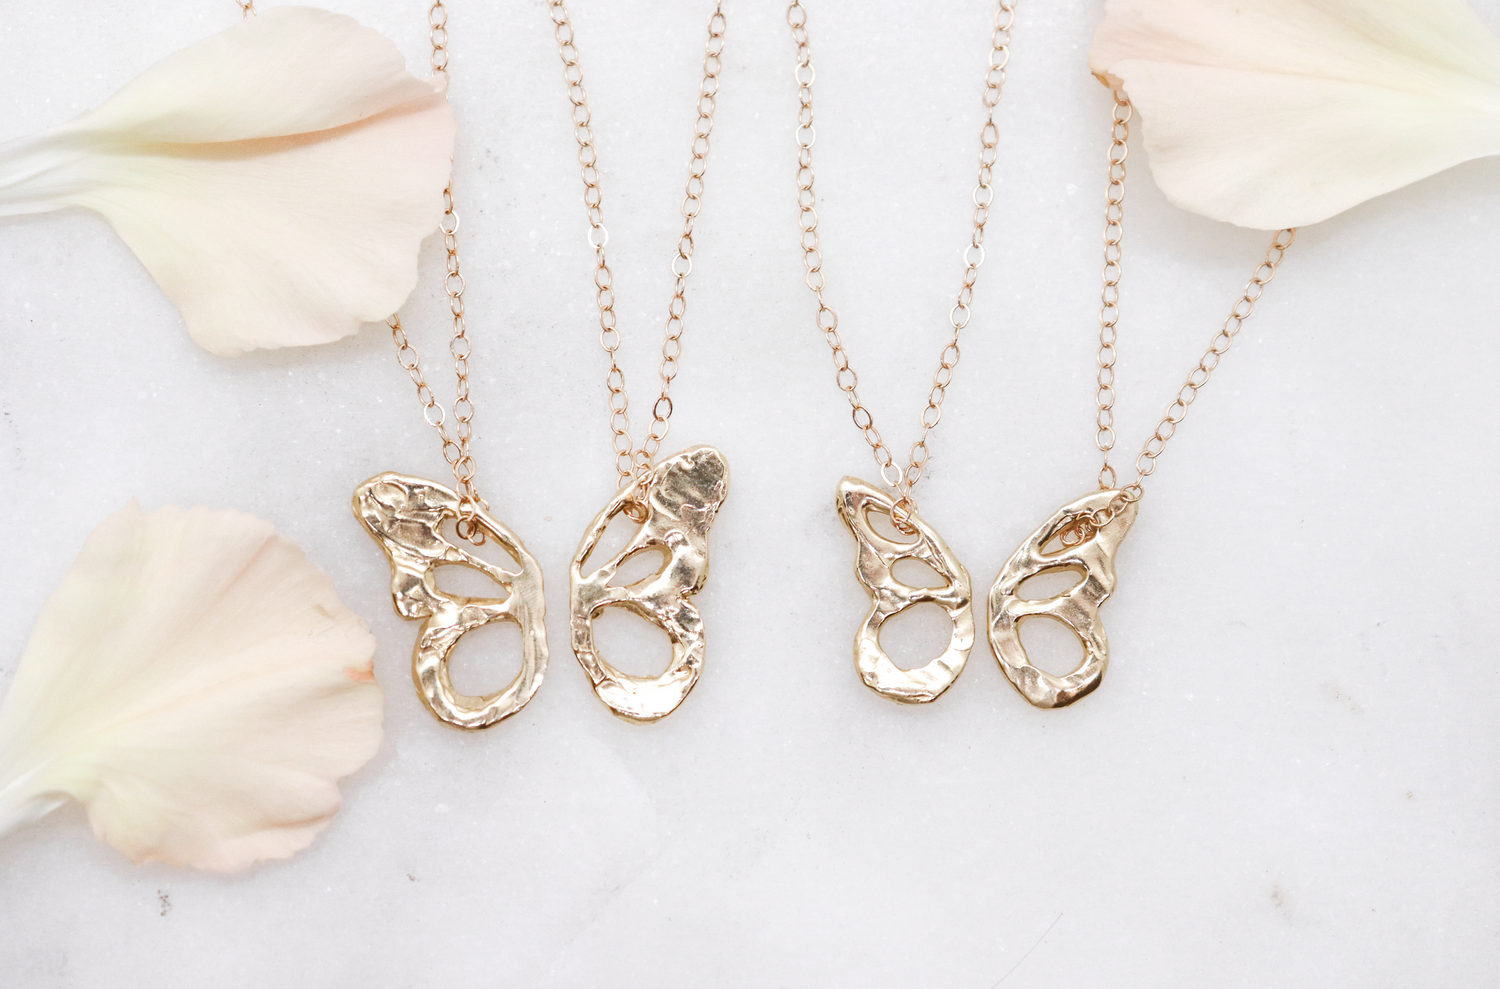 Best Friend butterfly charm necklaces made of 14k yellow gold